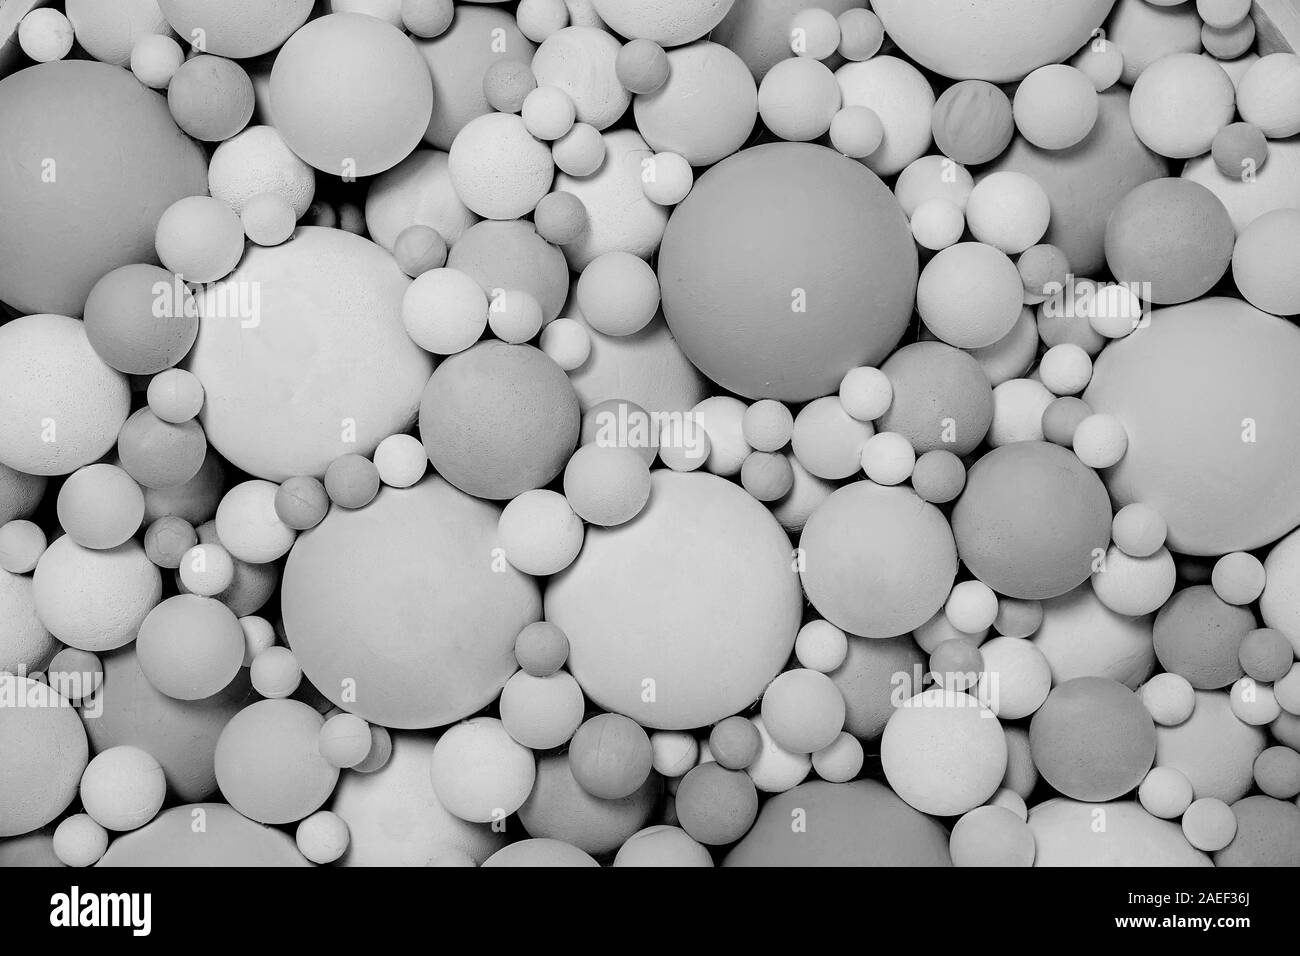 Black-white polystyrene beads of different sizes. Scenery black and white balls as a background. Texture round shape. Stock Photo